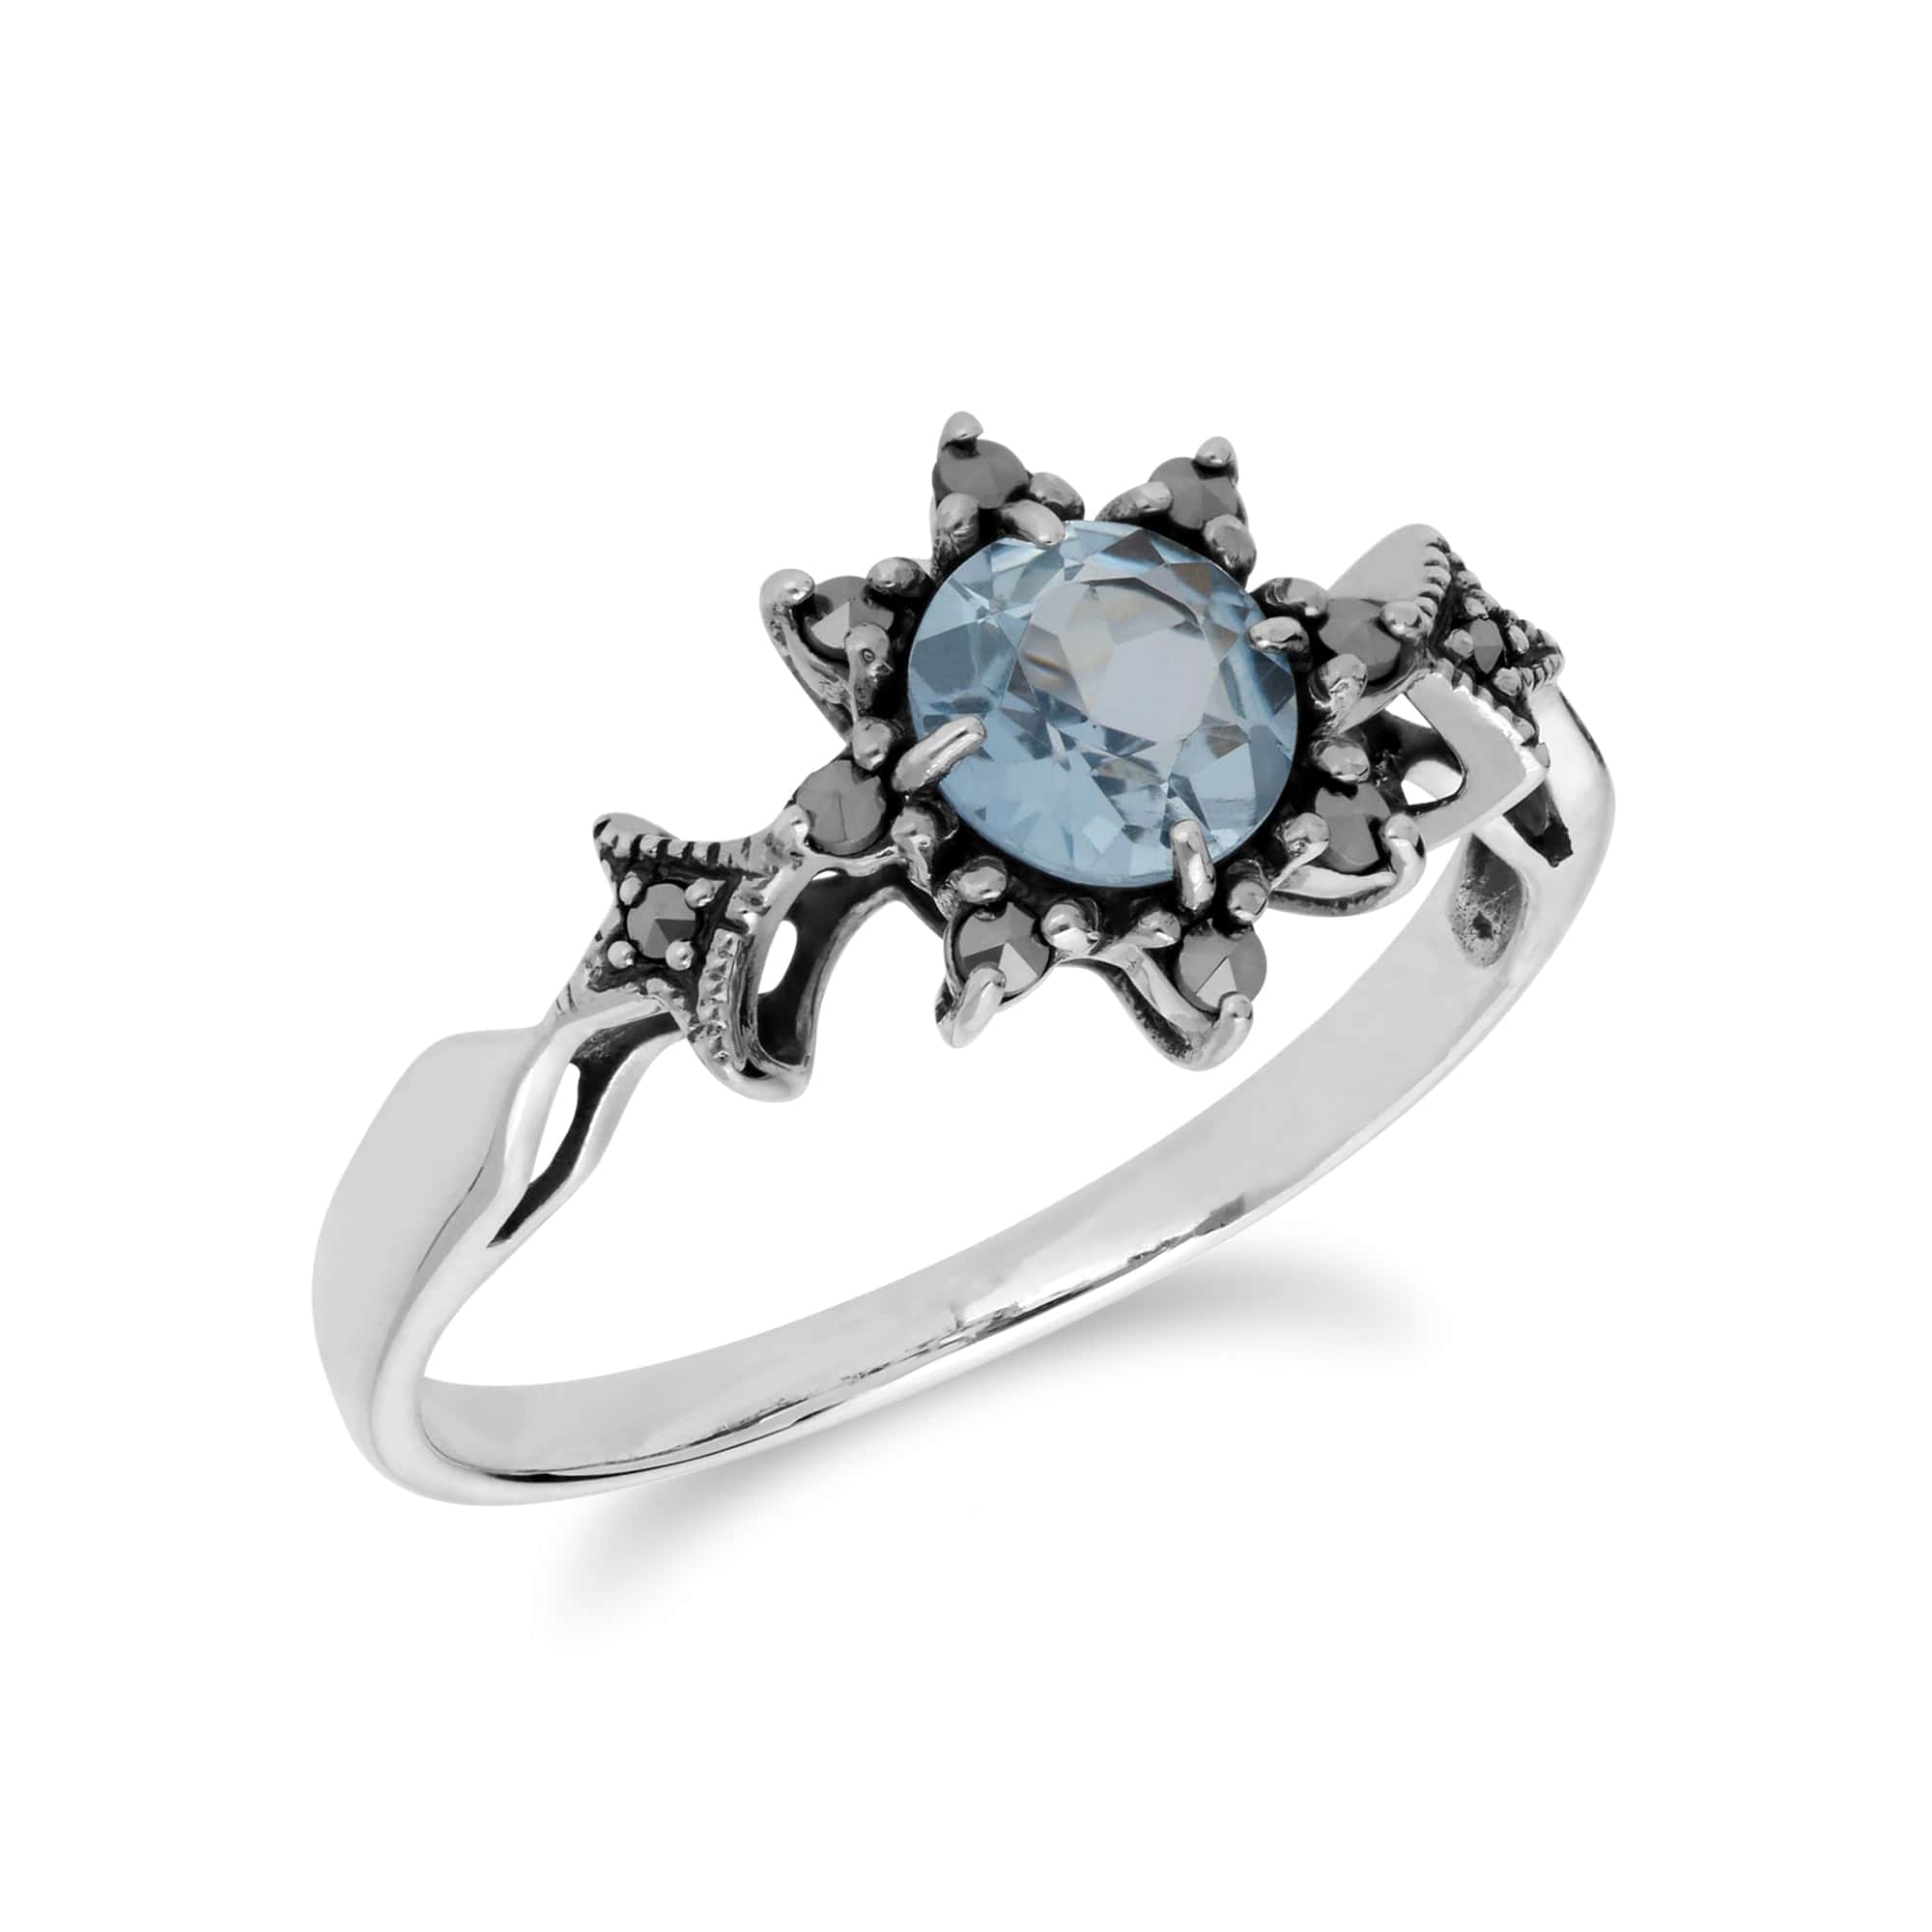 214R599501925 Art Deco Style Round Blue Topaz & Marcasite Floral Ring in 925 Sterling Silver 2